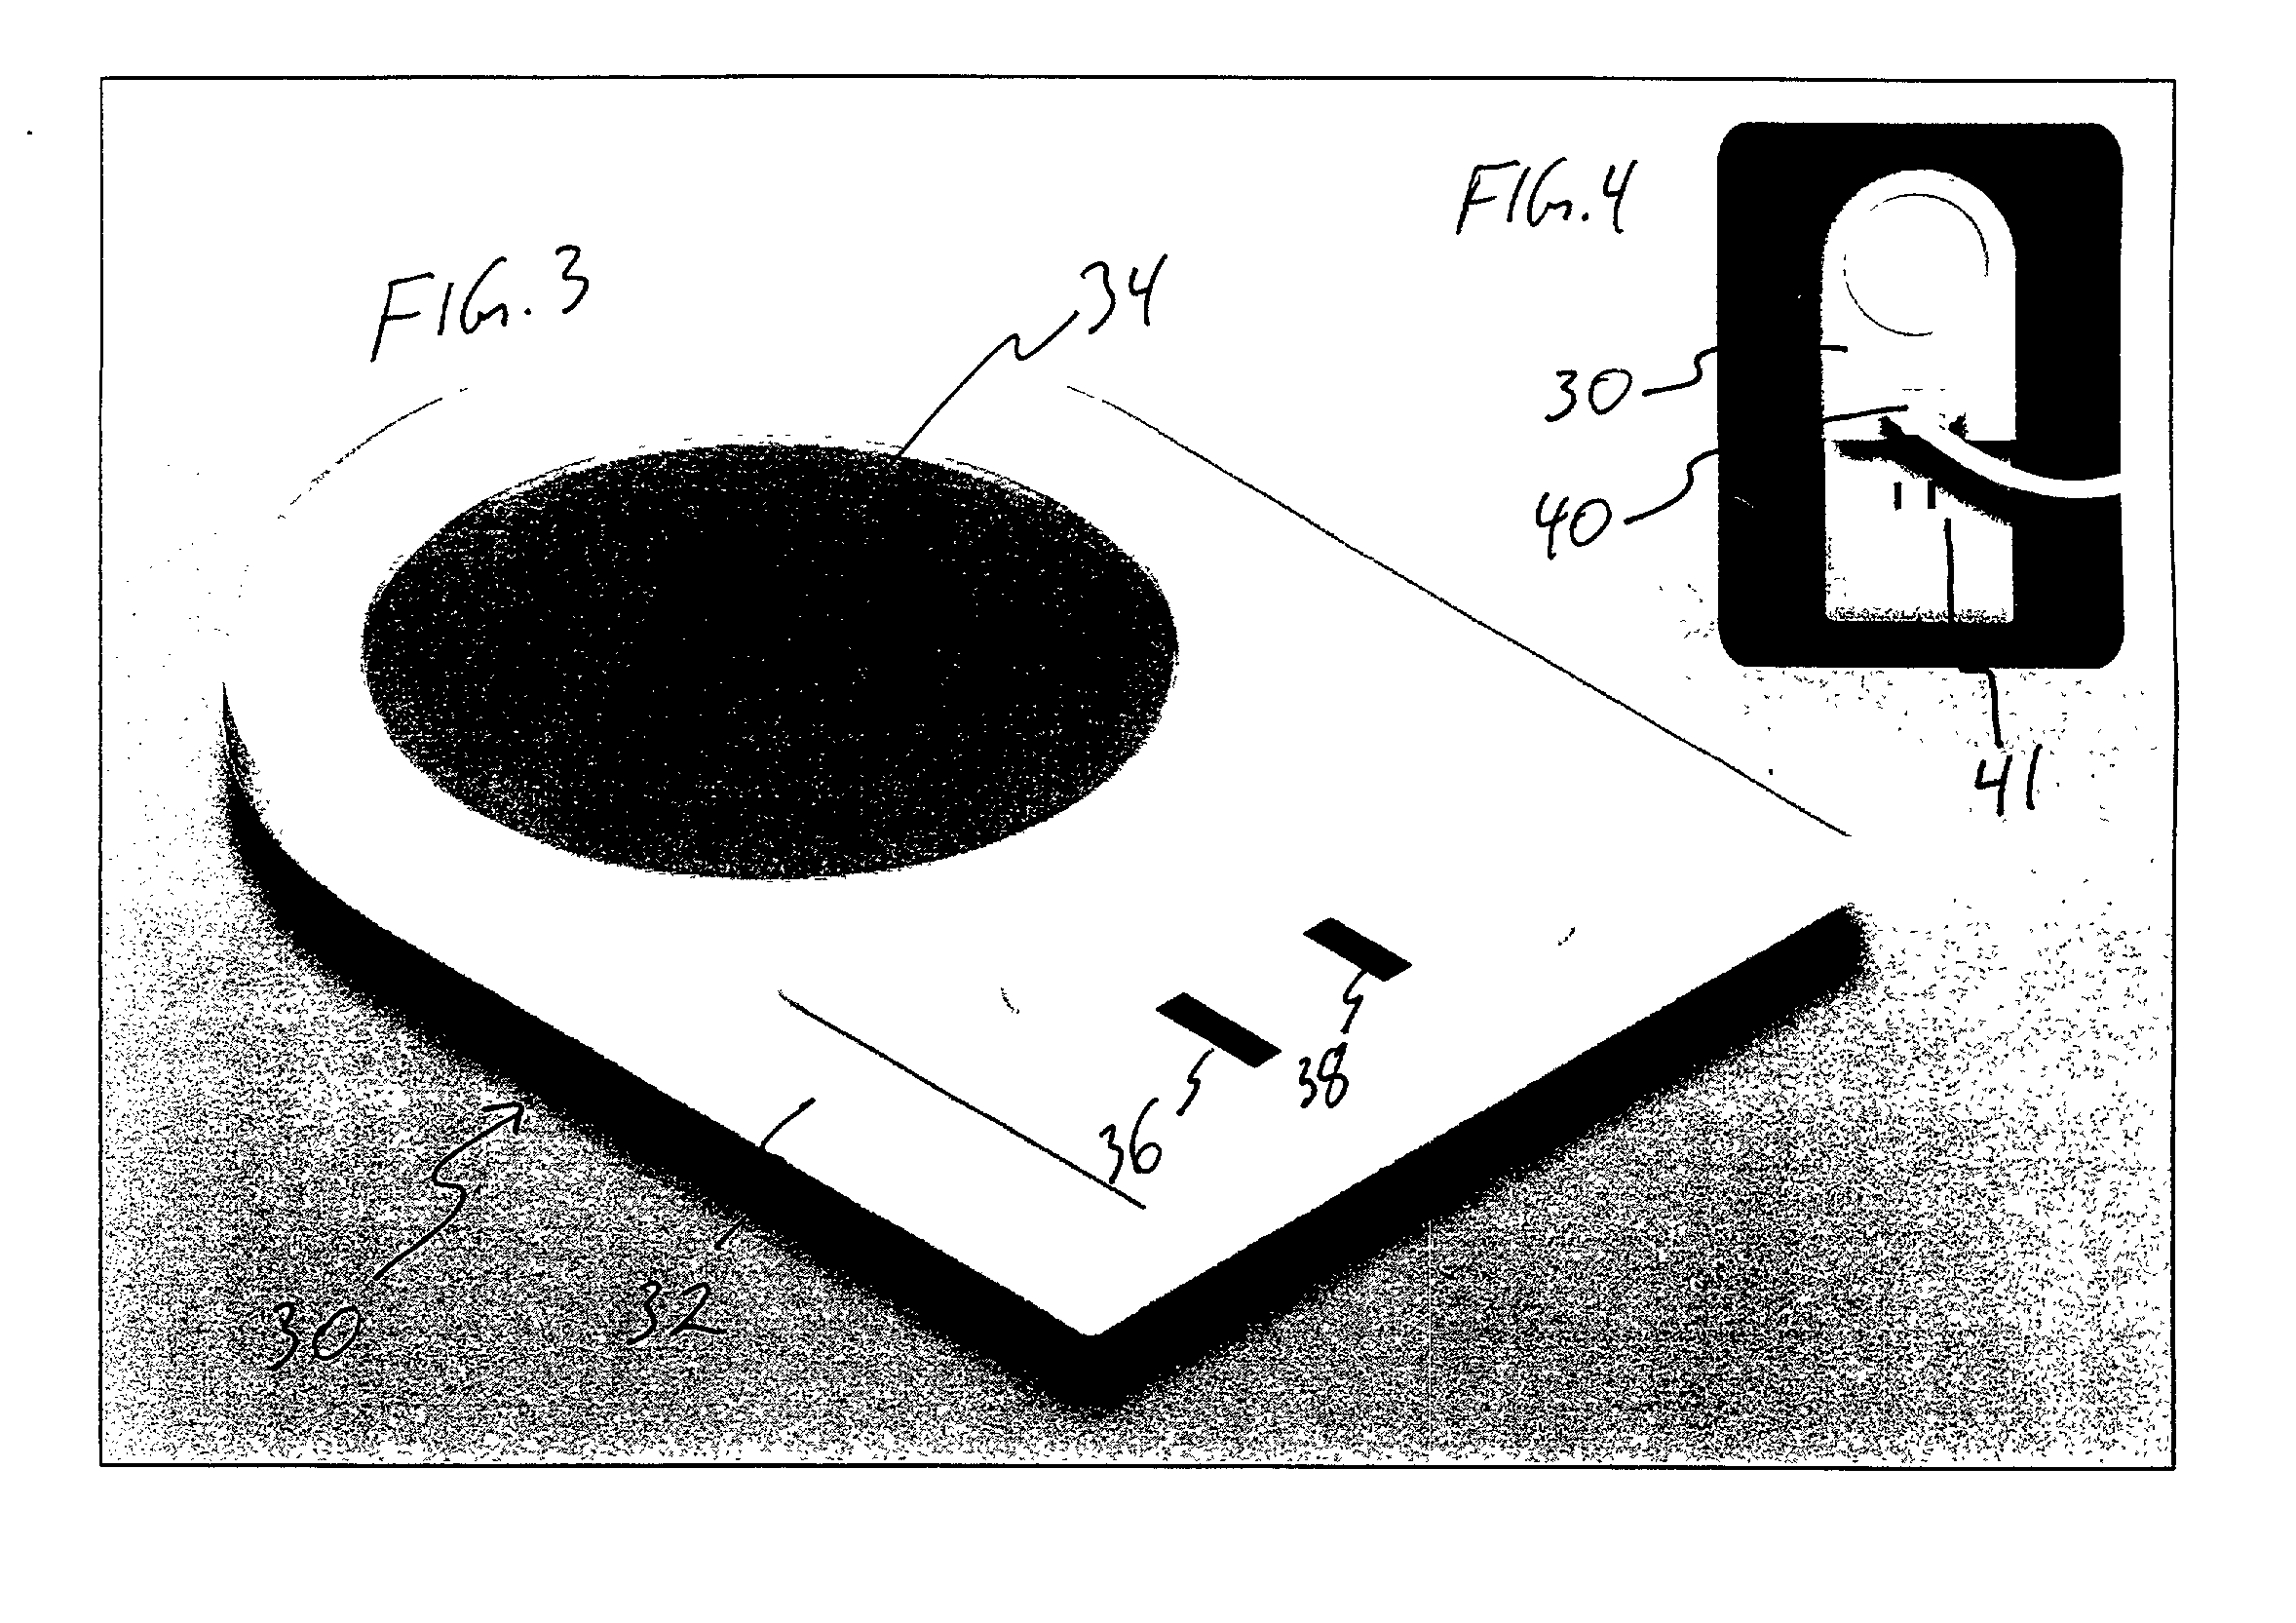 Method of providing electrical energy to devices without using prongs